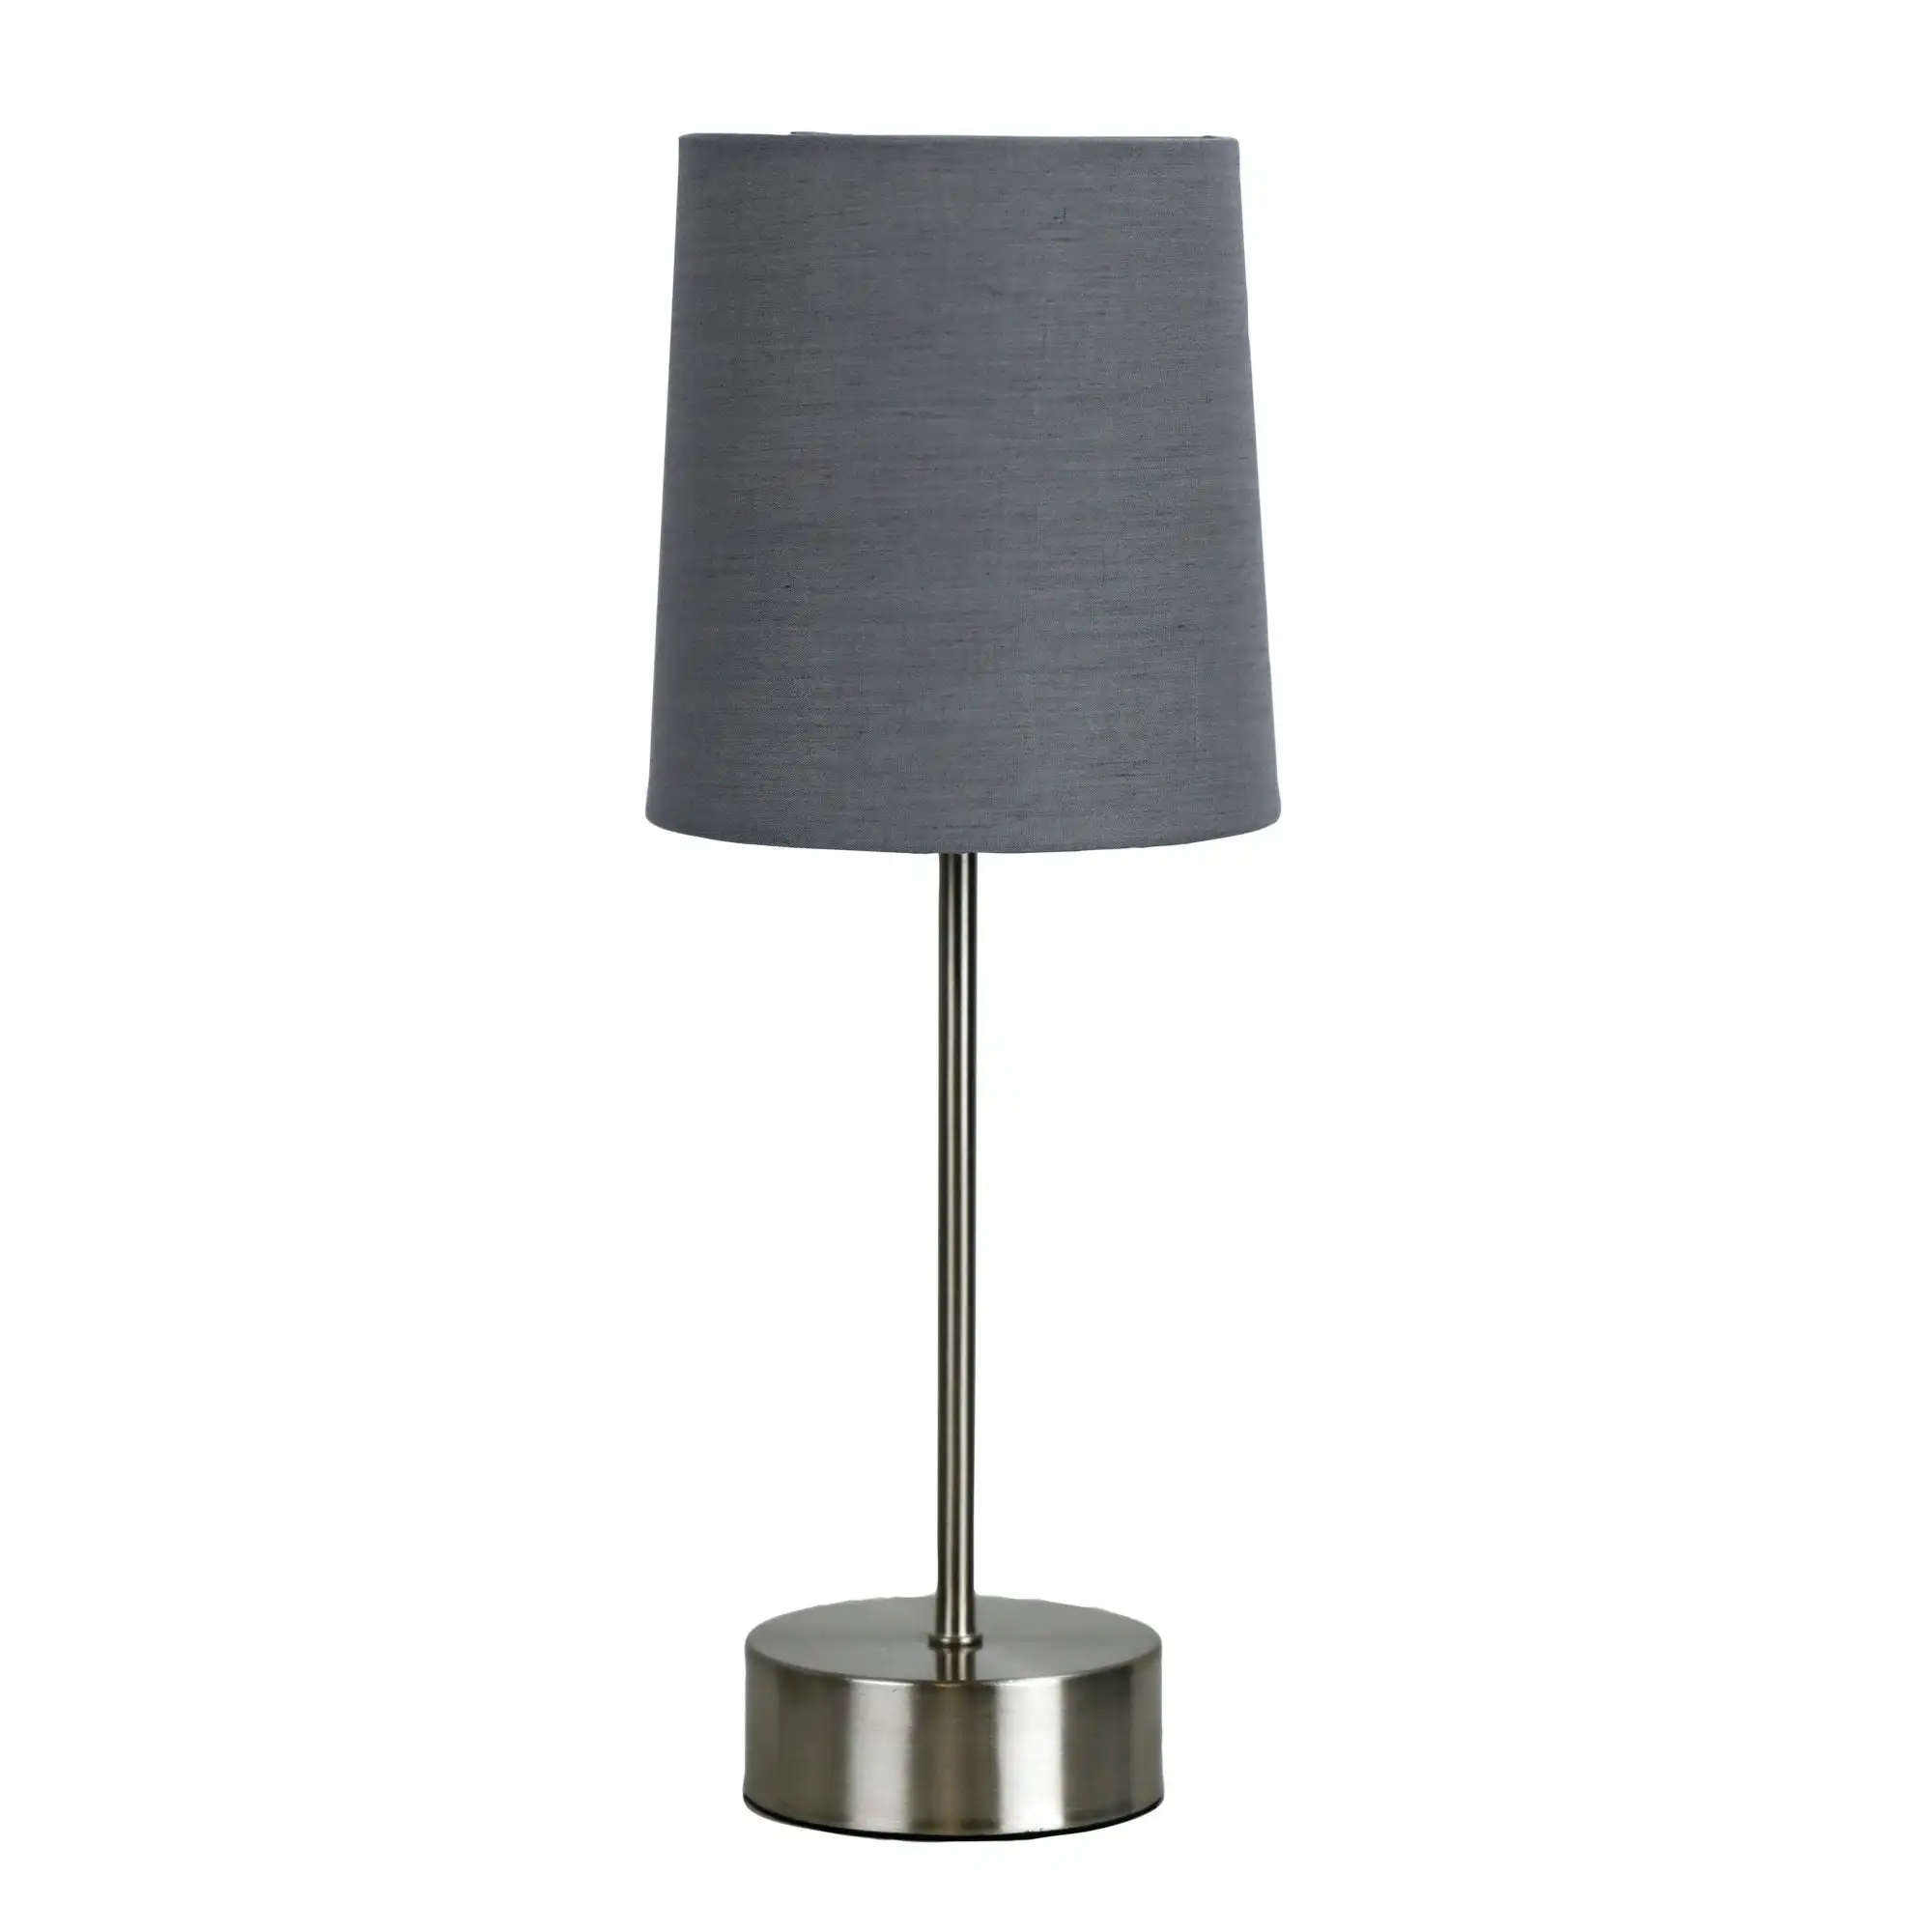 Lancet ON-OFF Touch Lamp Grey Shade